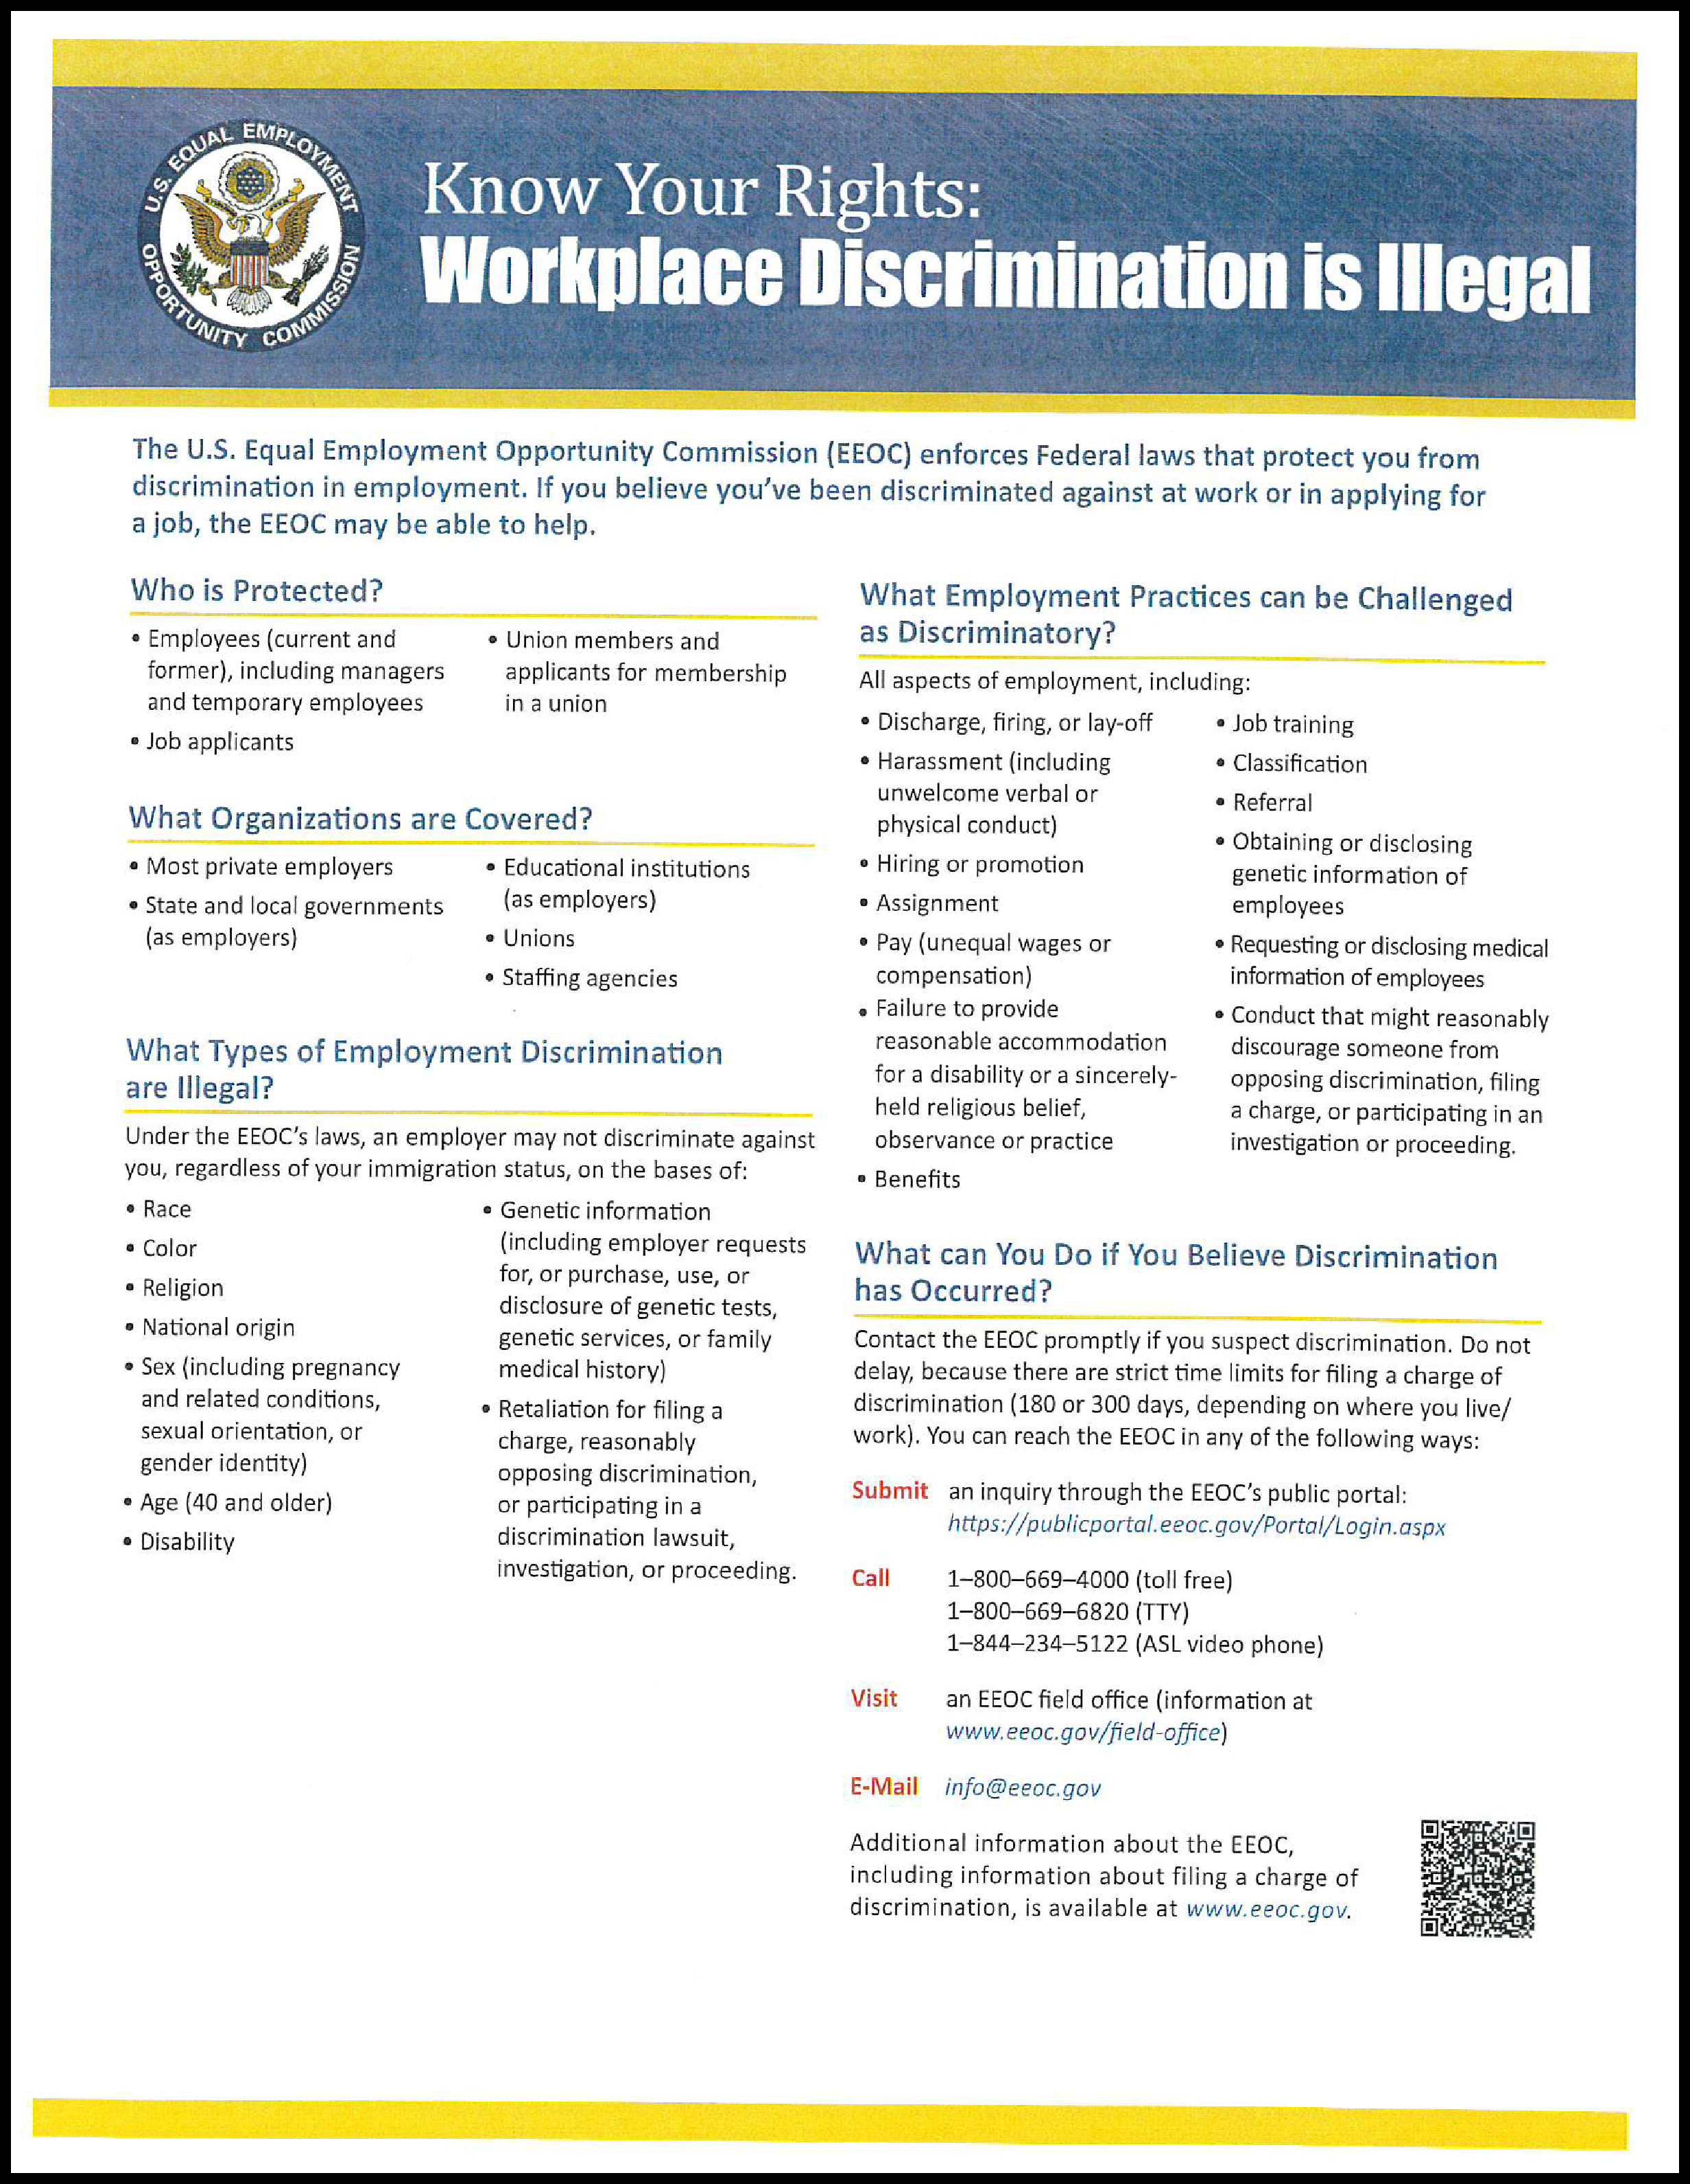 Know Your Rights- Workplace Discrimination is Illegal